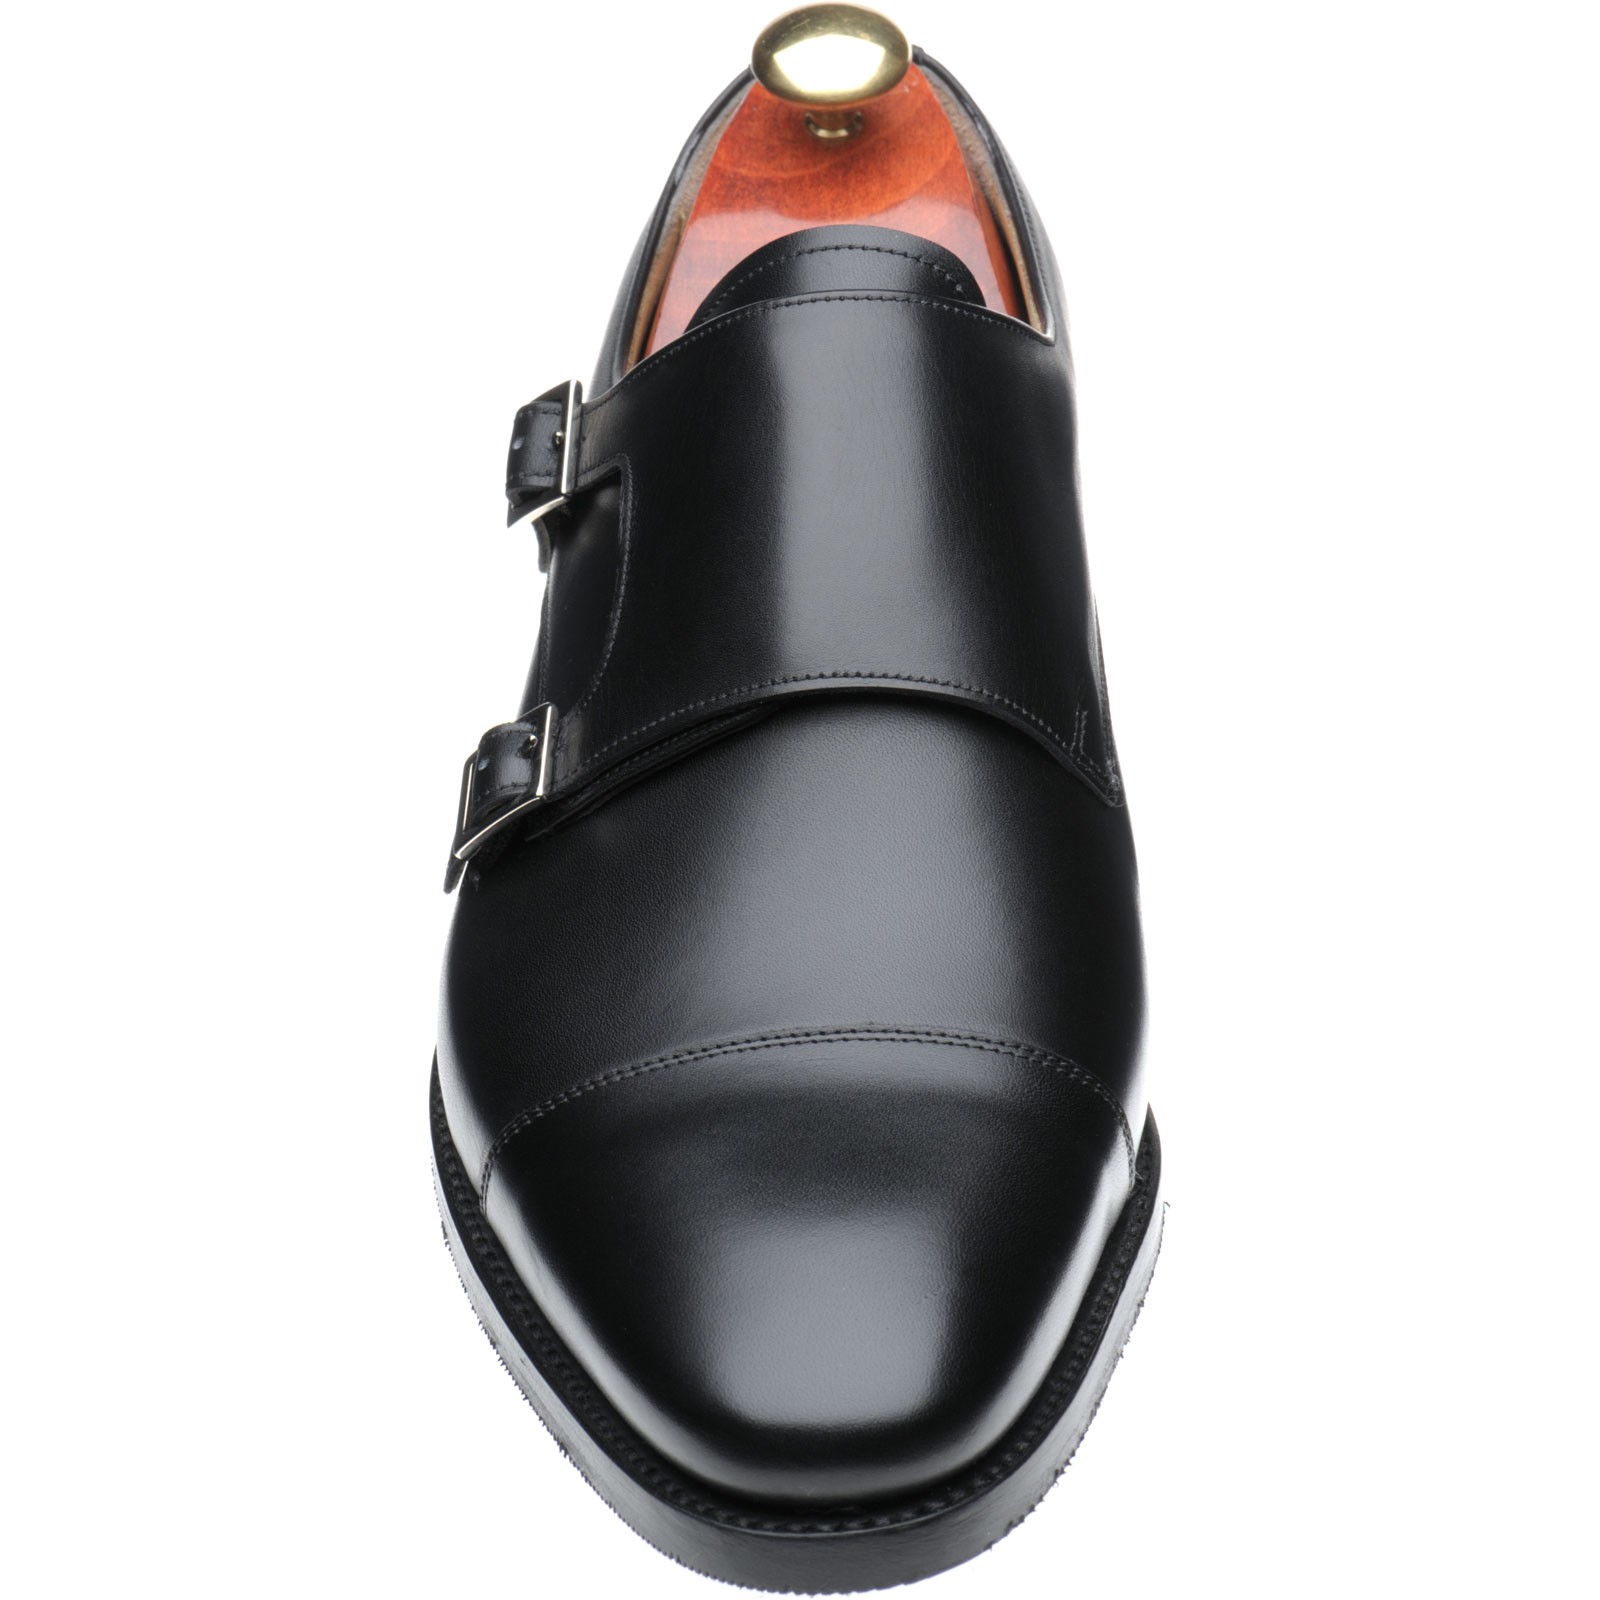 Barker shoes | Barker Tech | Edison in Black Calf at Herring Shoes